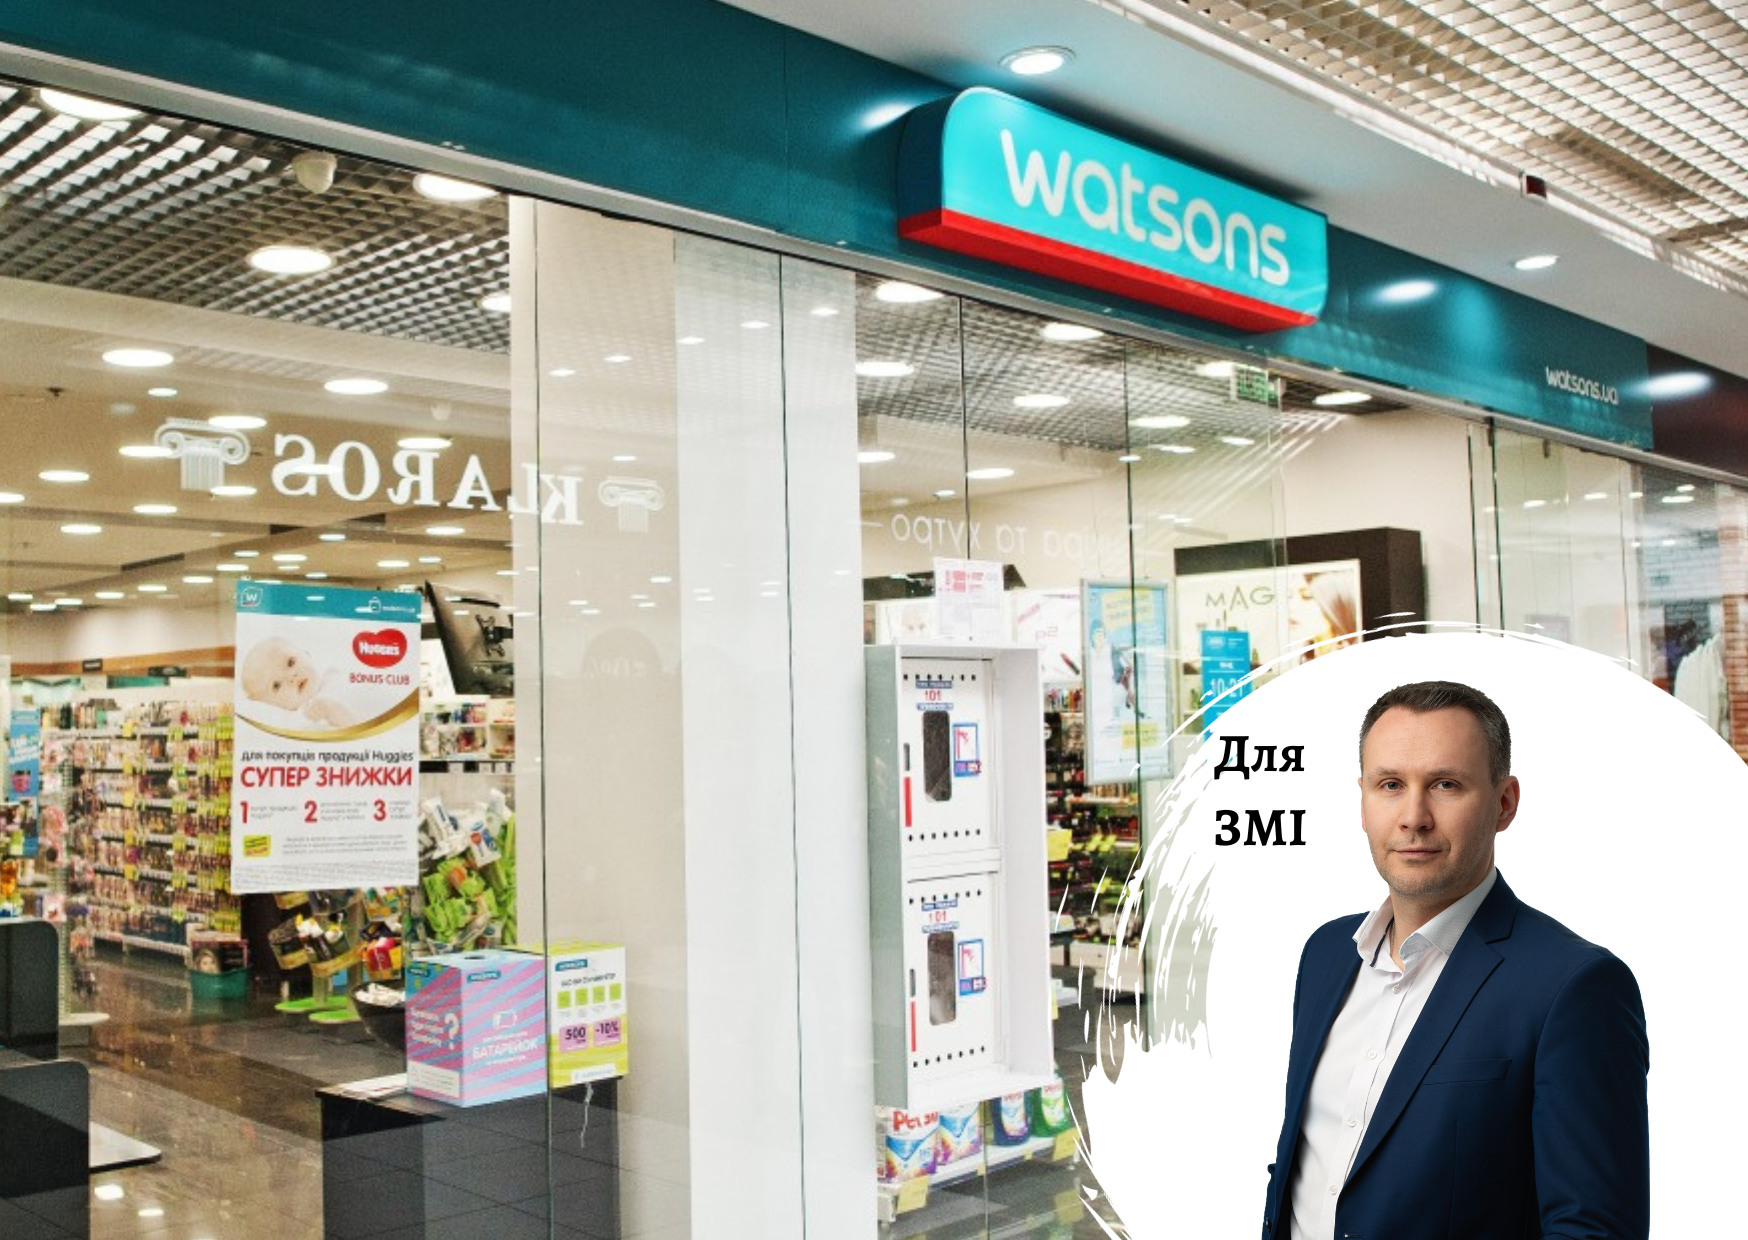 The Ukrainian “daughter” of Watsons was the undisputed leader of the market, but now has a smaller market share than local EVA and Prostor - comments on the market by Pro-Consulting CEO Oleksandr Sokolov. FORBES